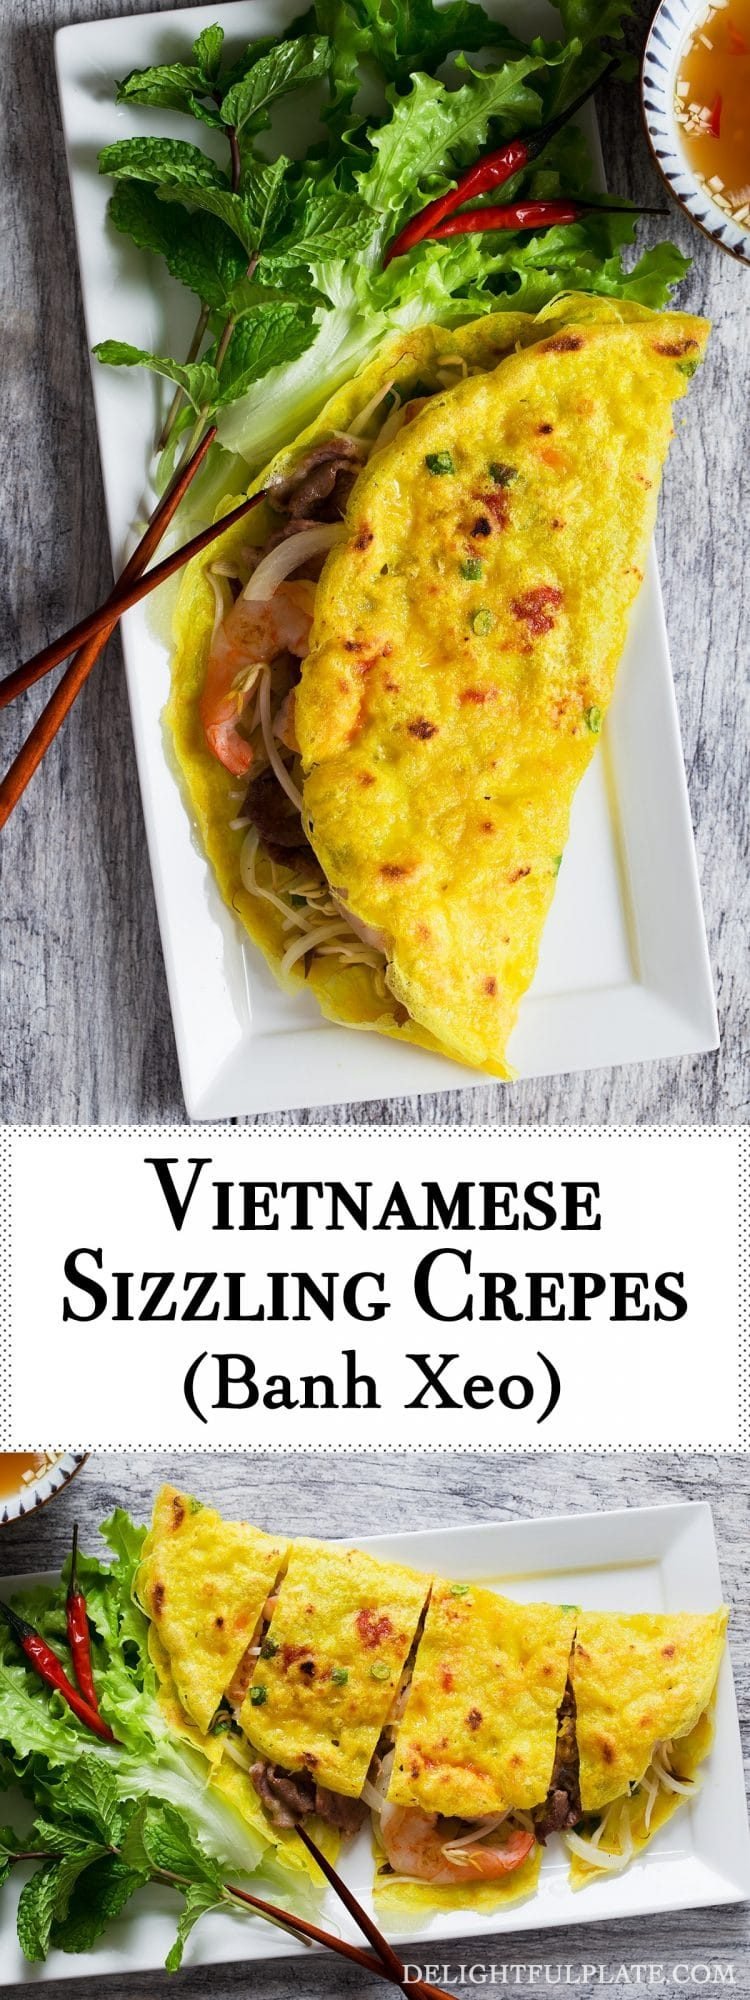 Vietnamese Crepe is crispy and filled with shrimp, pork and bean sprouts. It is quick and easy to make this crepe at home. You can serve it with lettuce, herb and Vietnamese dipping sauce as a snack, appetizer or main dish.